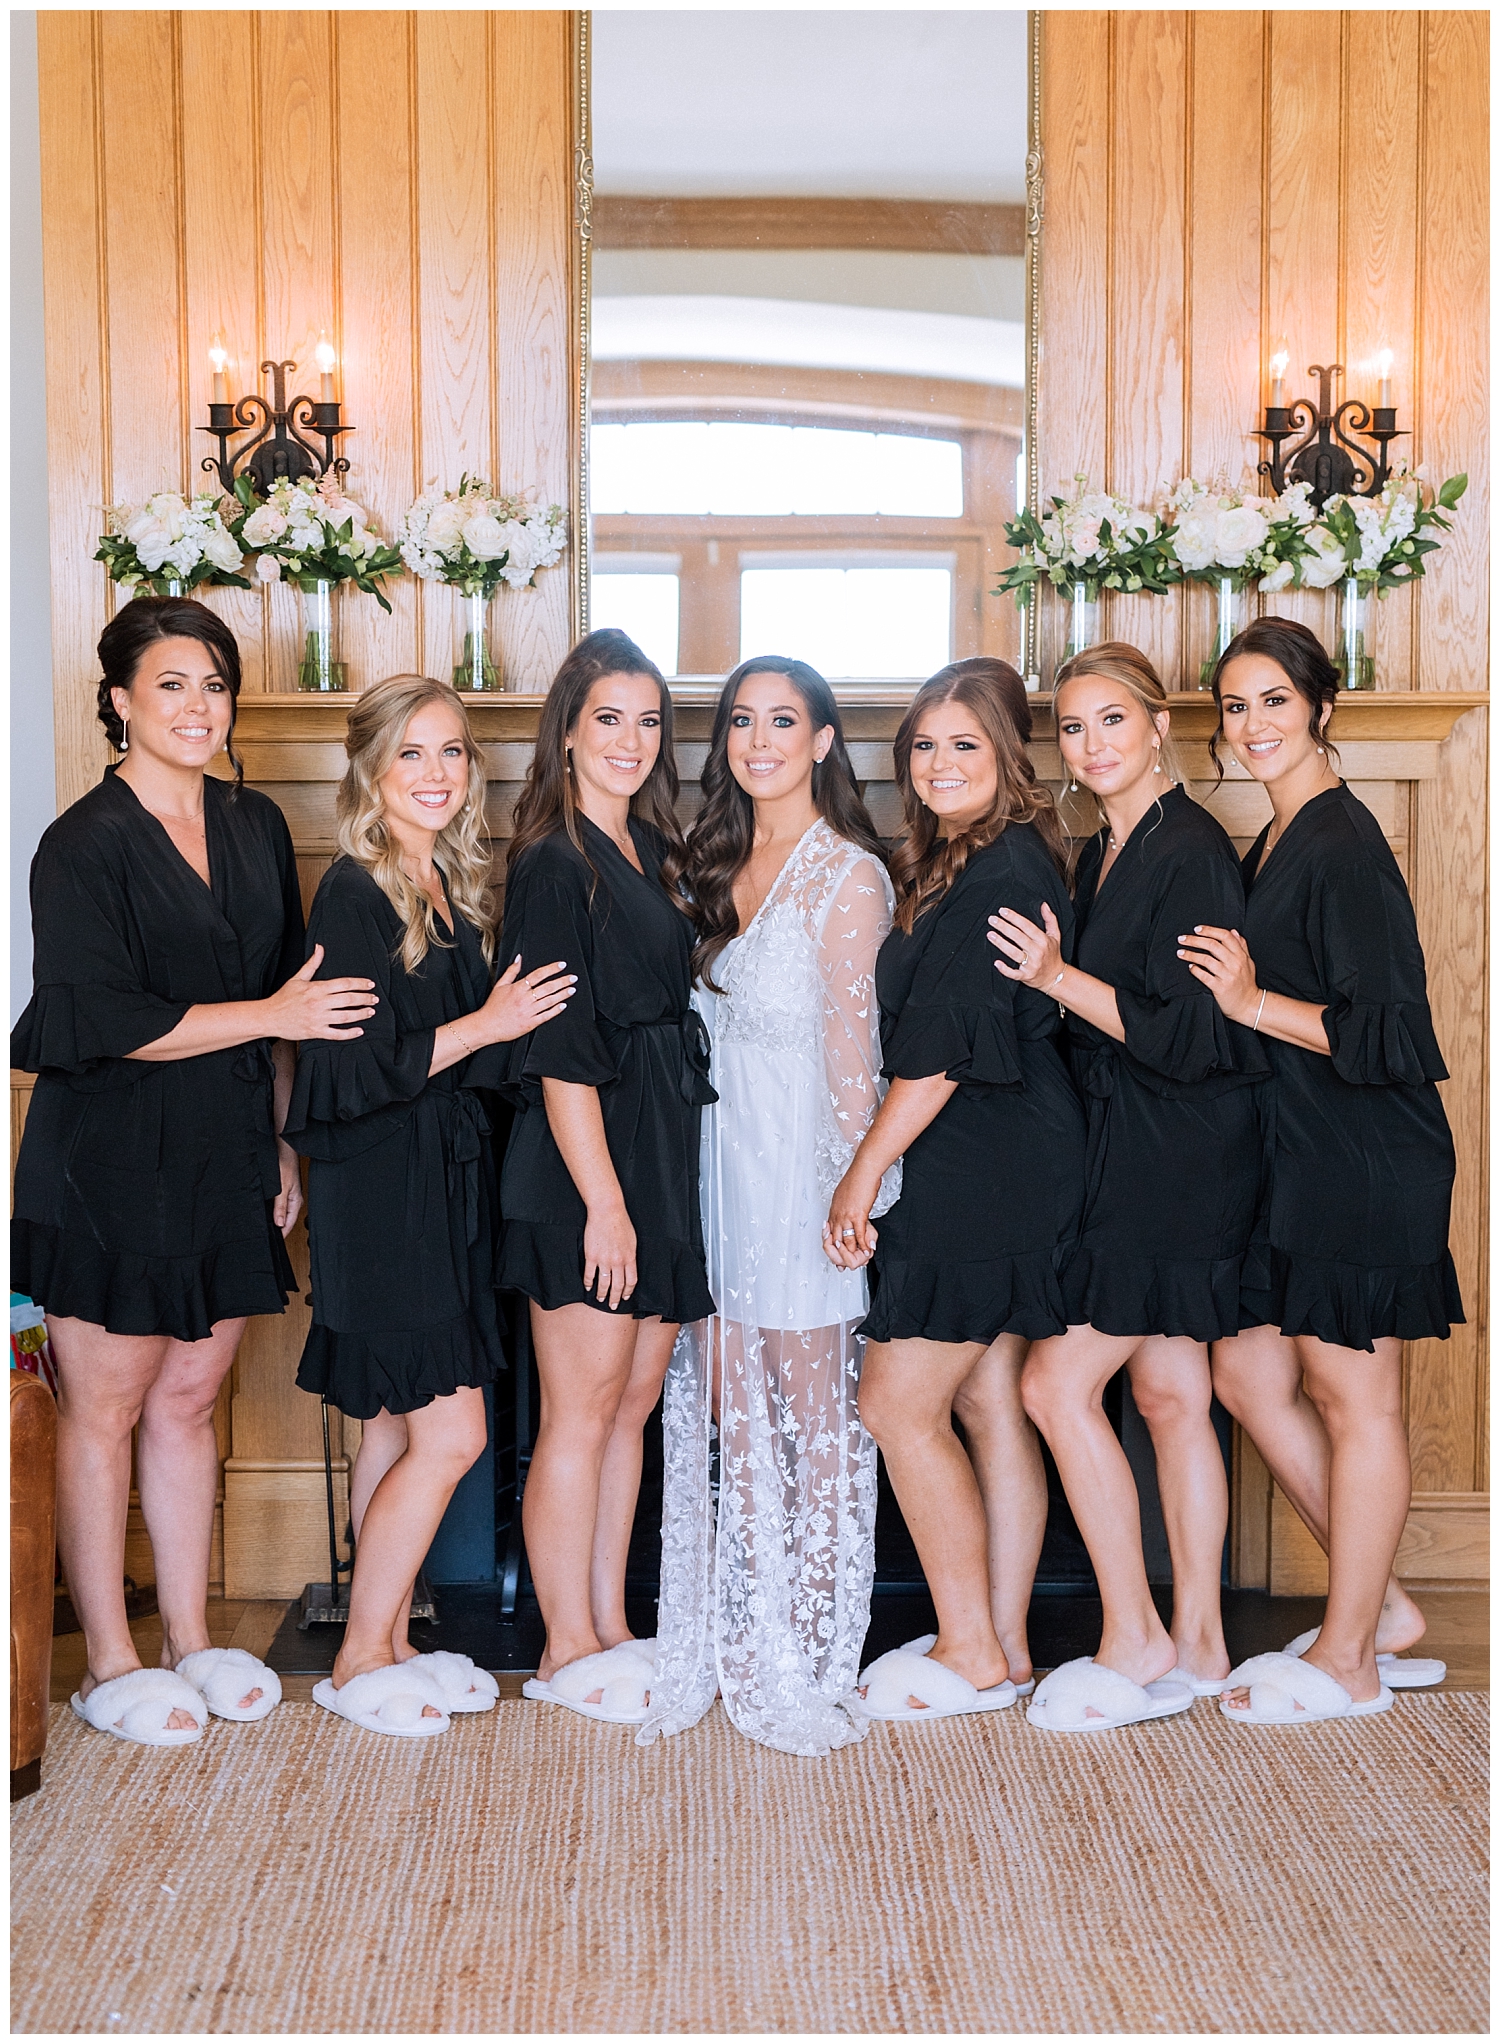 Bride and bridesmaids getting ready in black and white robes